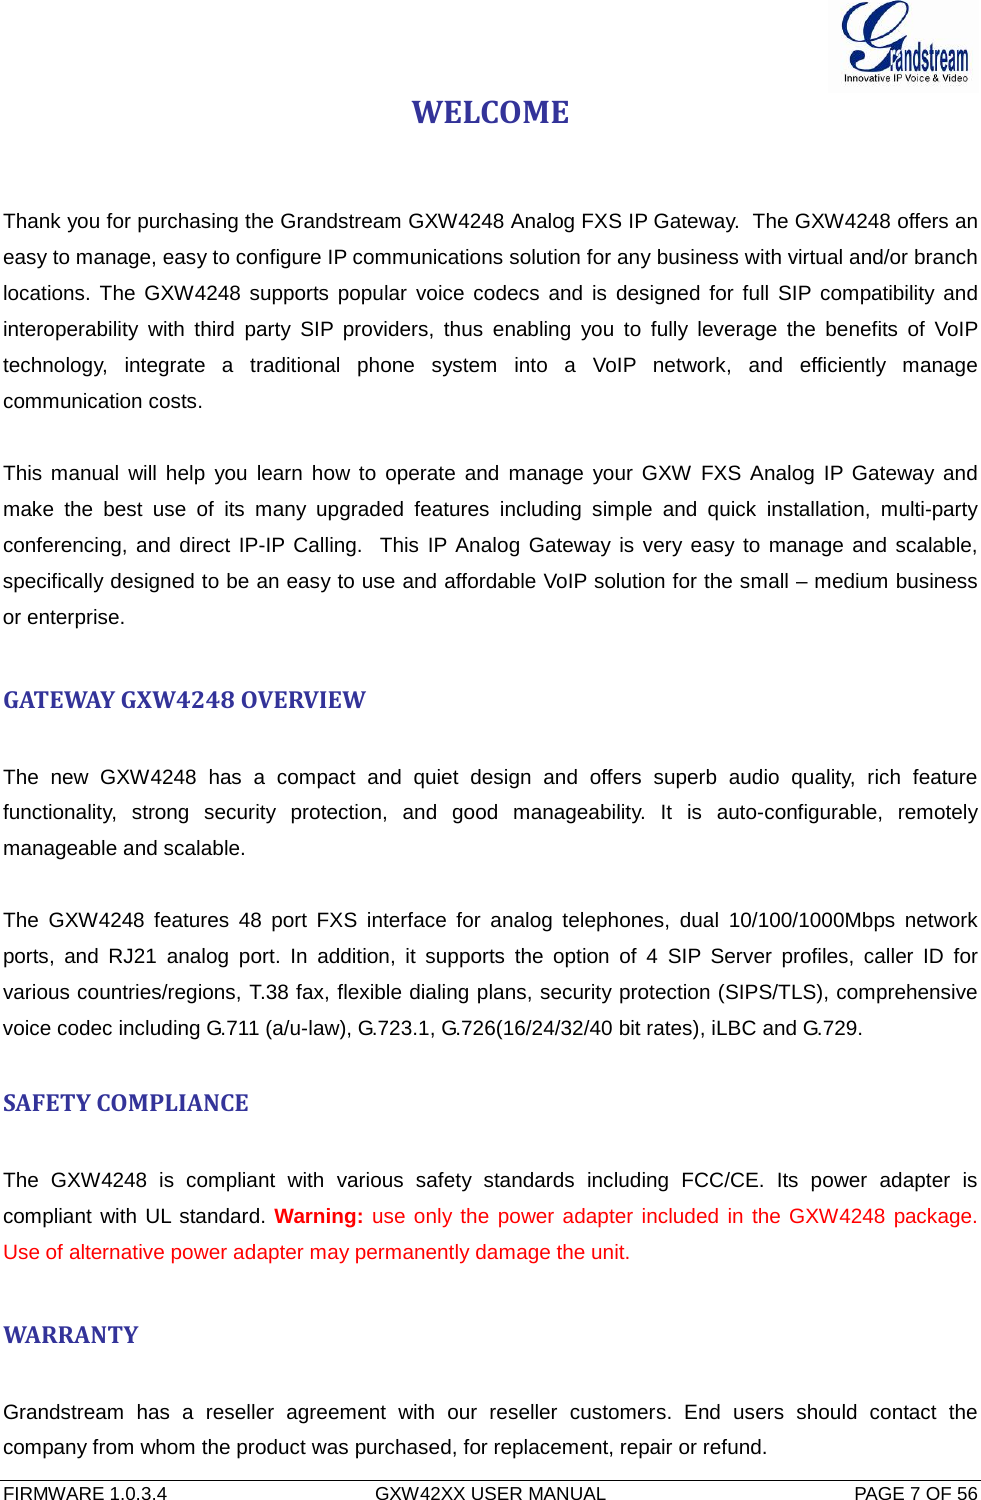  FIRMWARE 1.0.3.4  GXW42XX USER MANUAL  PAGE 7 OF 56      WELCOME   Thank you for purchasing the Grandstream GXW4248 Analog FXS IP Gateway.  The GXW4248 offers an easy to manage, easy to configure IP communications solution for any business with virtual and/or branch locations.  The GXW4248 supports popular voice codecs and is designed for full SIP compatibility and interoperability with third  party SIP providers, thus enabling you to fully leverage the benefits of VoIP technology,  integrate a traditional phone system into a VoIP network, and efficiently manage communication costs.  This manual will help you learn how to operate and manage your GXW FXS Analog IP Gateway and make the best use of its many upgraded features including simple and quick installation, multi-party conferencing, and direct IP-IP Calling.  This IP Analog Gateway is very easy to manage and scalable, specifically designed to be an easy to use and affordable VoIP solution for the small – medium business or enterprise.  GATEWAY GXW4248 OVERVIEW  The new GXW4248  has a compact and quiet design and offers superb audio quality, rich feature functionality, strong security protection, and good manageability. It is auto-configurable, remotely manageable and scalable.  The  GXW4248  features  48 port FXS interface for analog telephones, dual 10/100/1000Mbps network ports, and RJ21 analog port. In addition, it supports  the option of 4  SIP  Server profiles, caller ID for various countries/regions, T.38 fax, flexible dialing plans, security protection (SIPS/TLS), comprehensive voice codec including G.711 (a/u-law), G.723.1, G.726(16/24/32/40 bit rates), iLBC and G.729.  SAFETY COMPLIANCE  The  GXW4248 is compliant with various safety standards including FCC/CE. Its power adapter is compliant with UL standard. Warning: use only the power adapter included in the GXW4248 package.  Use of alternative power adapter may permanently damage the unit.  WARRANTY  Grandstream has a reseller agreement with our reseller customers. End users should contact  the company from whom the product was purchased, for replacement, repair or refund. 